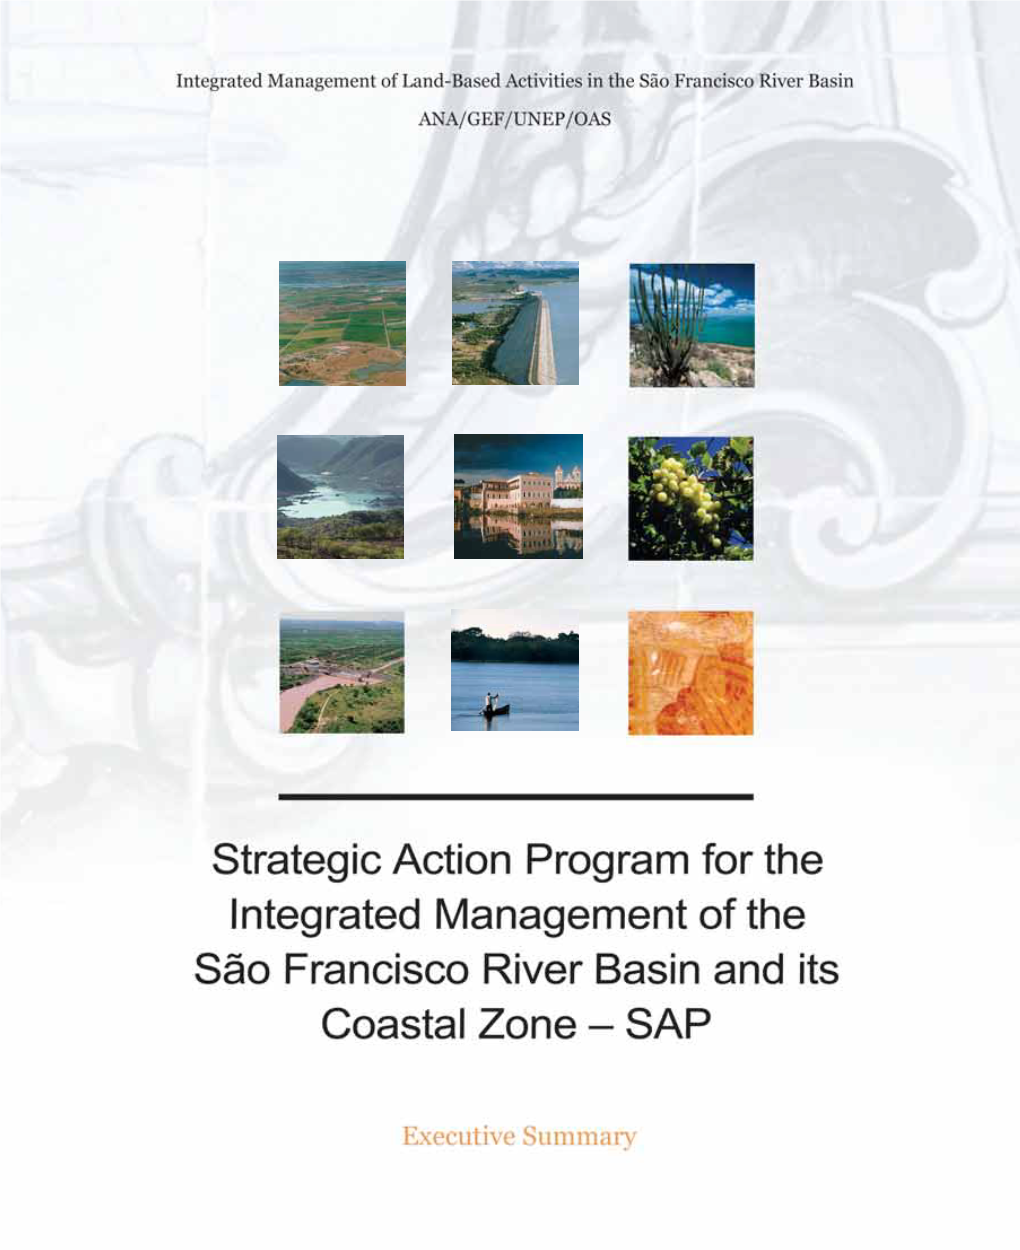 Strategic Action Program for the Integrated Management of the São Francisco River Basin and Its Coastal